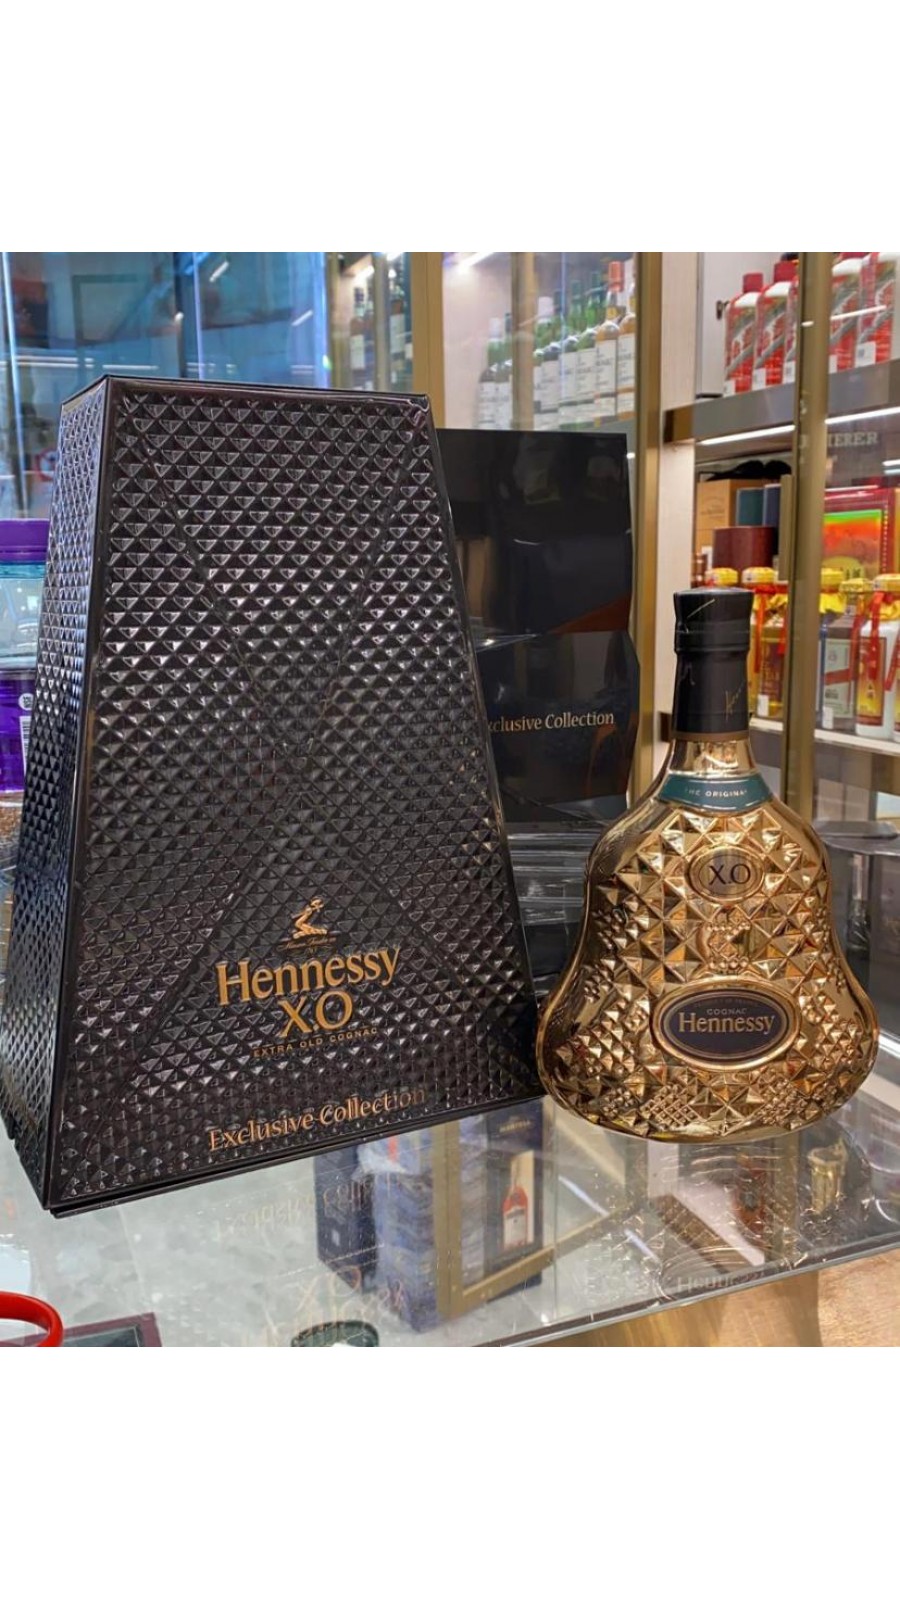 Hennessy XO Exclusive Collection Selection 7 (70cl, 40%)